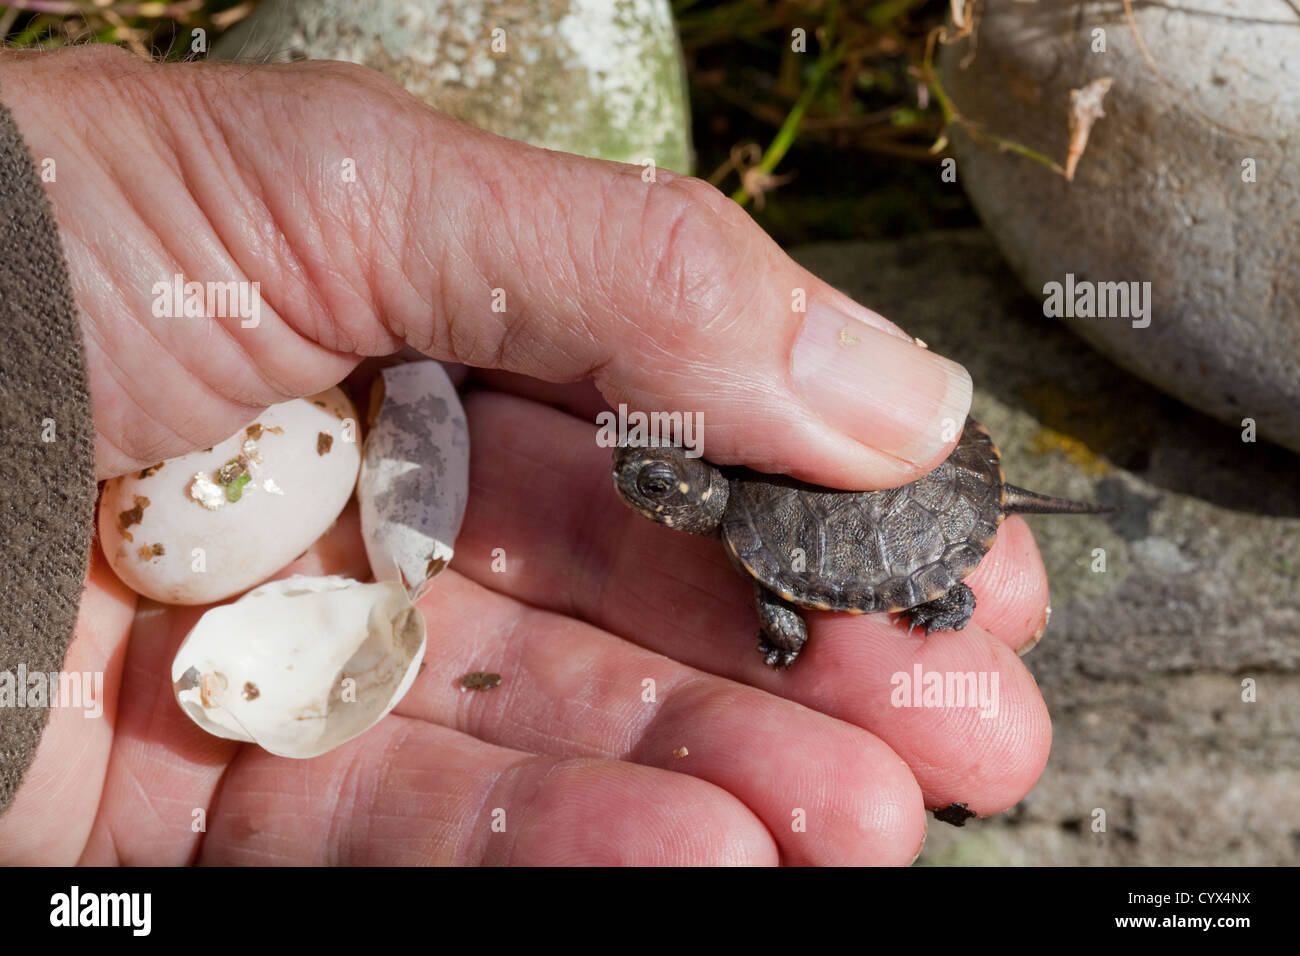 European Pond Turtle Emys orbicularis.Hatchling held in the hand with an unhatched egg and shell remnants from this hatching. Bred in captivity. Stock Photo